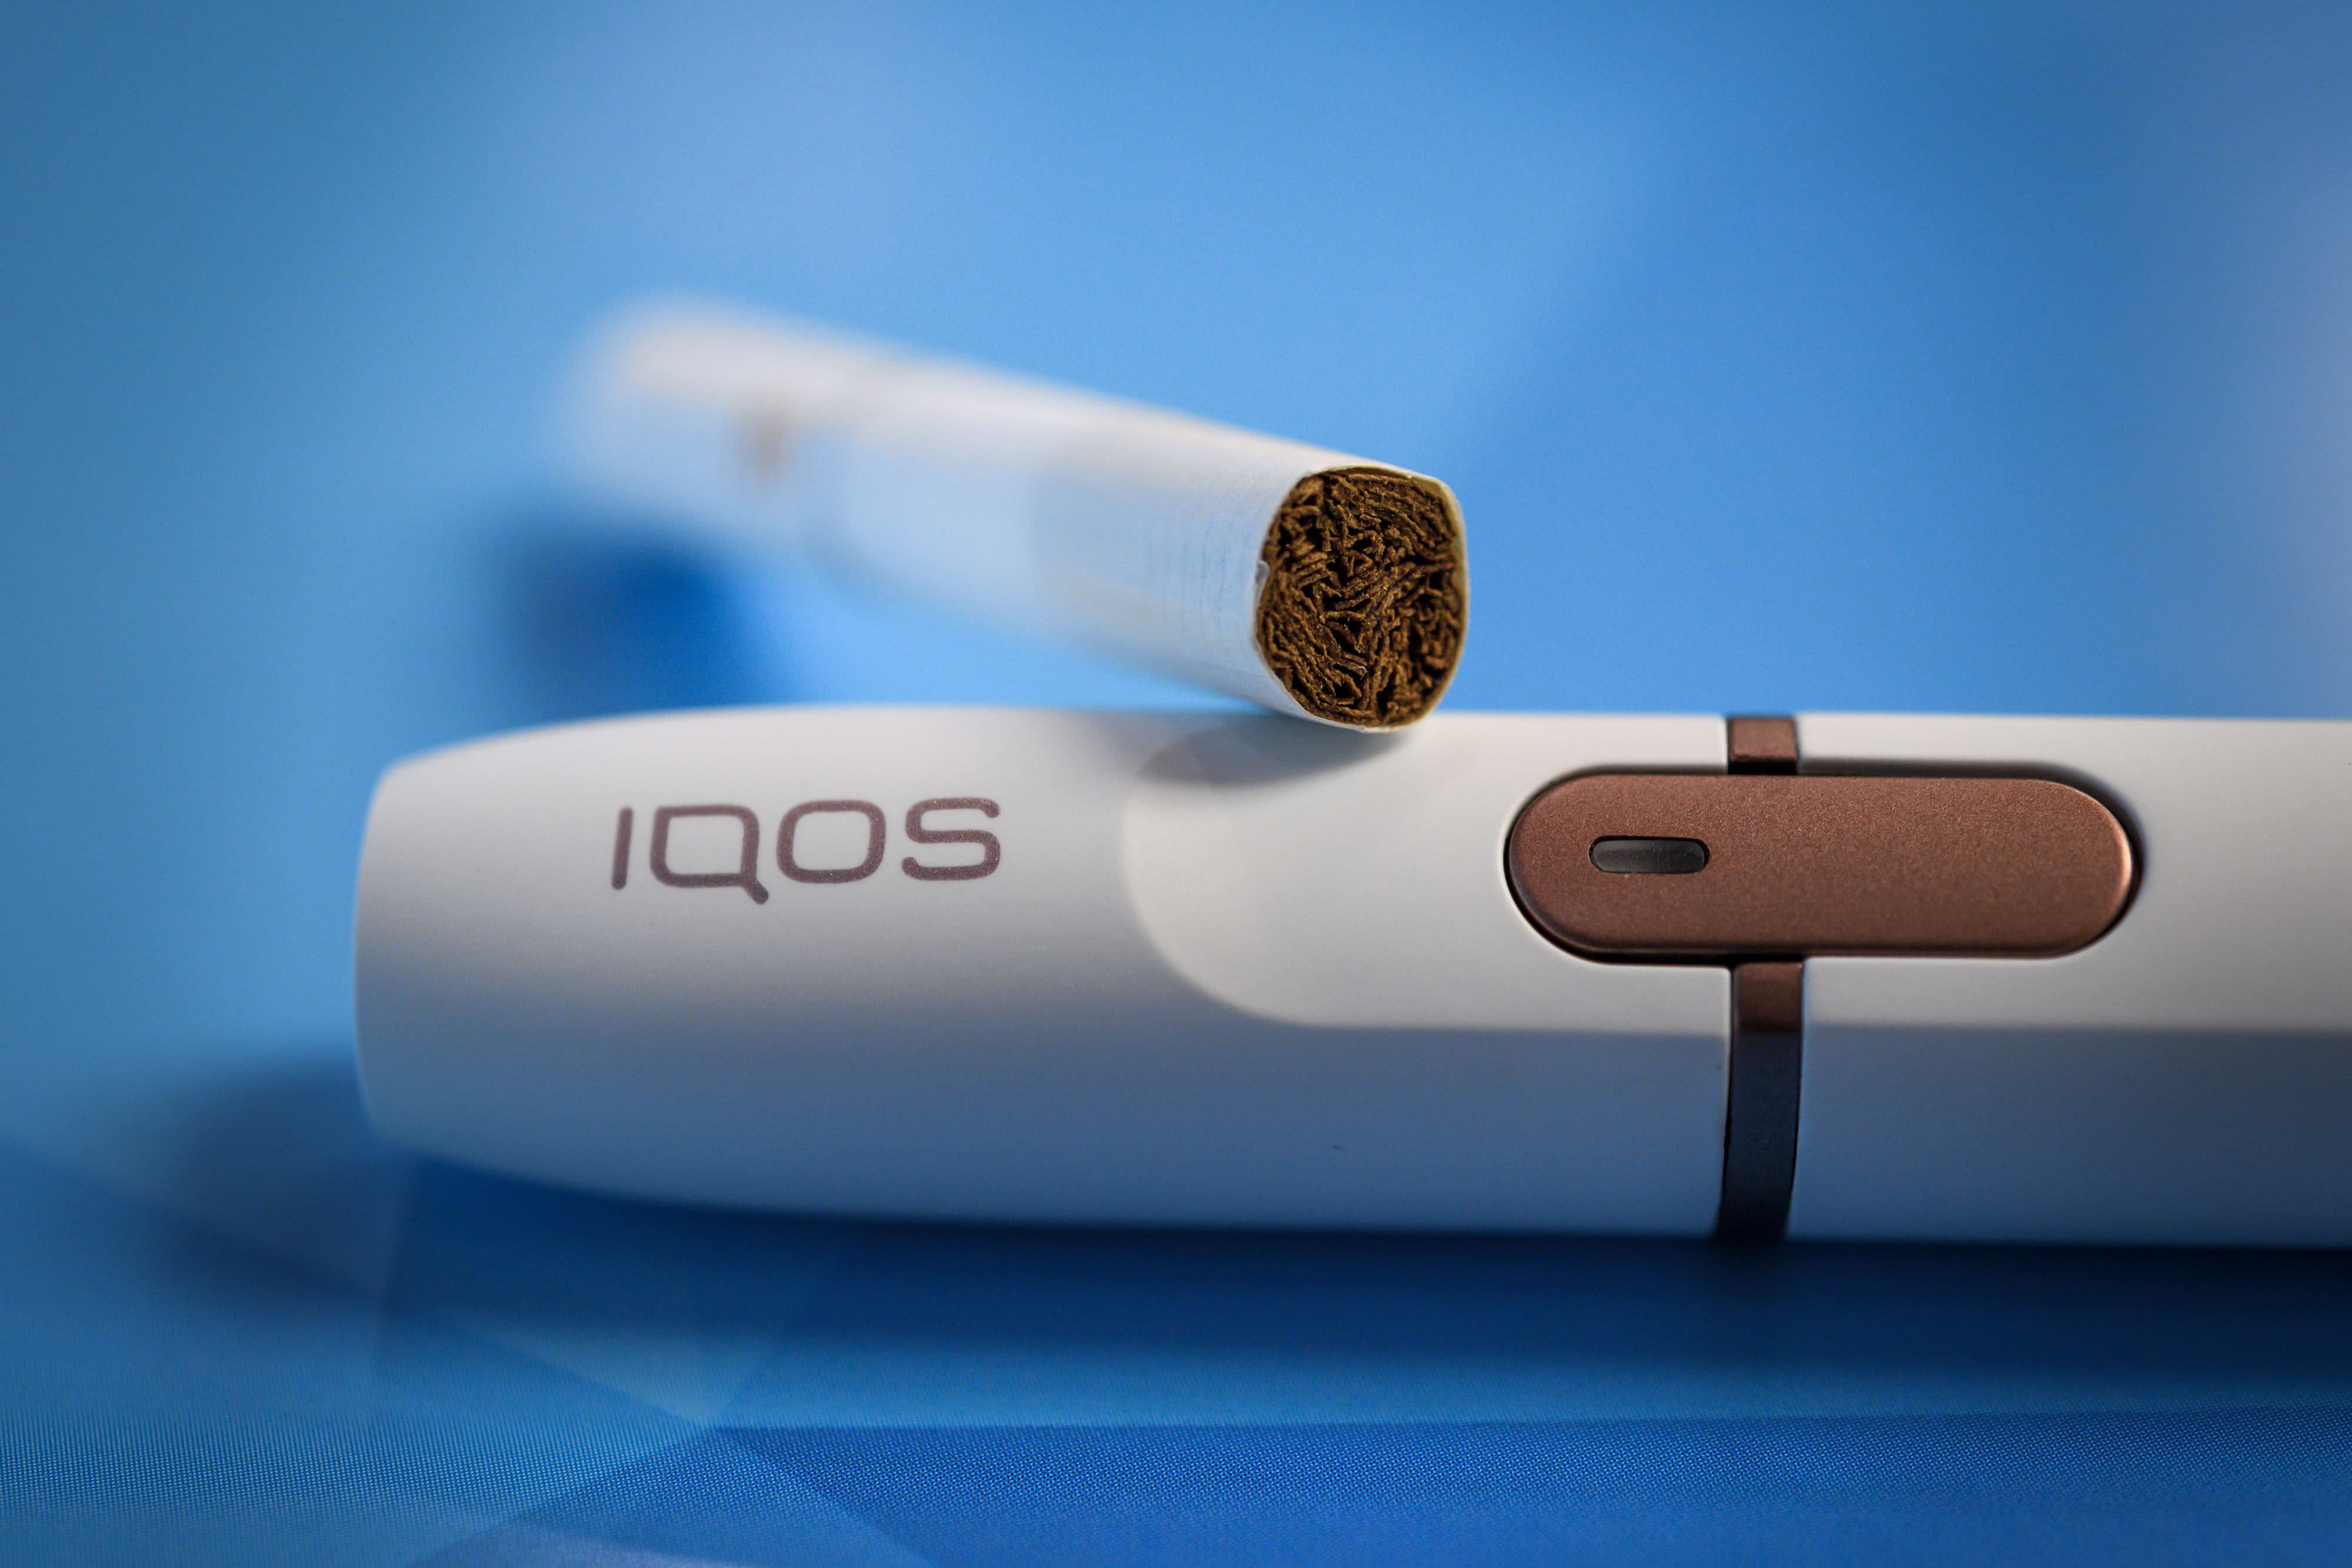 Philip Morris, Altria banned from importing or selling Iqos tobacco device in the U.S. - CNBC